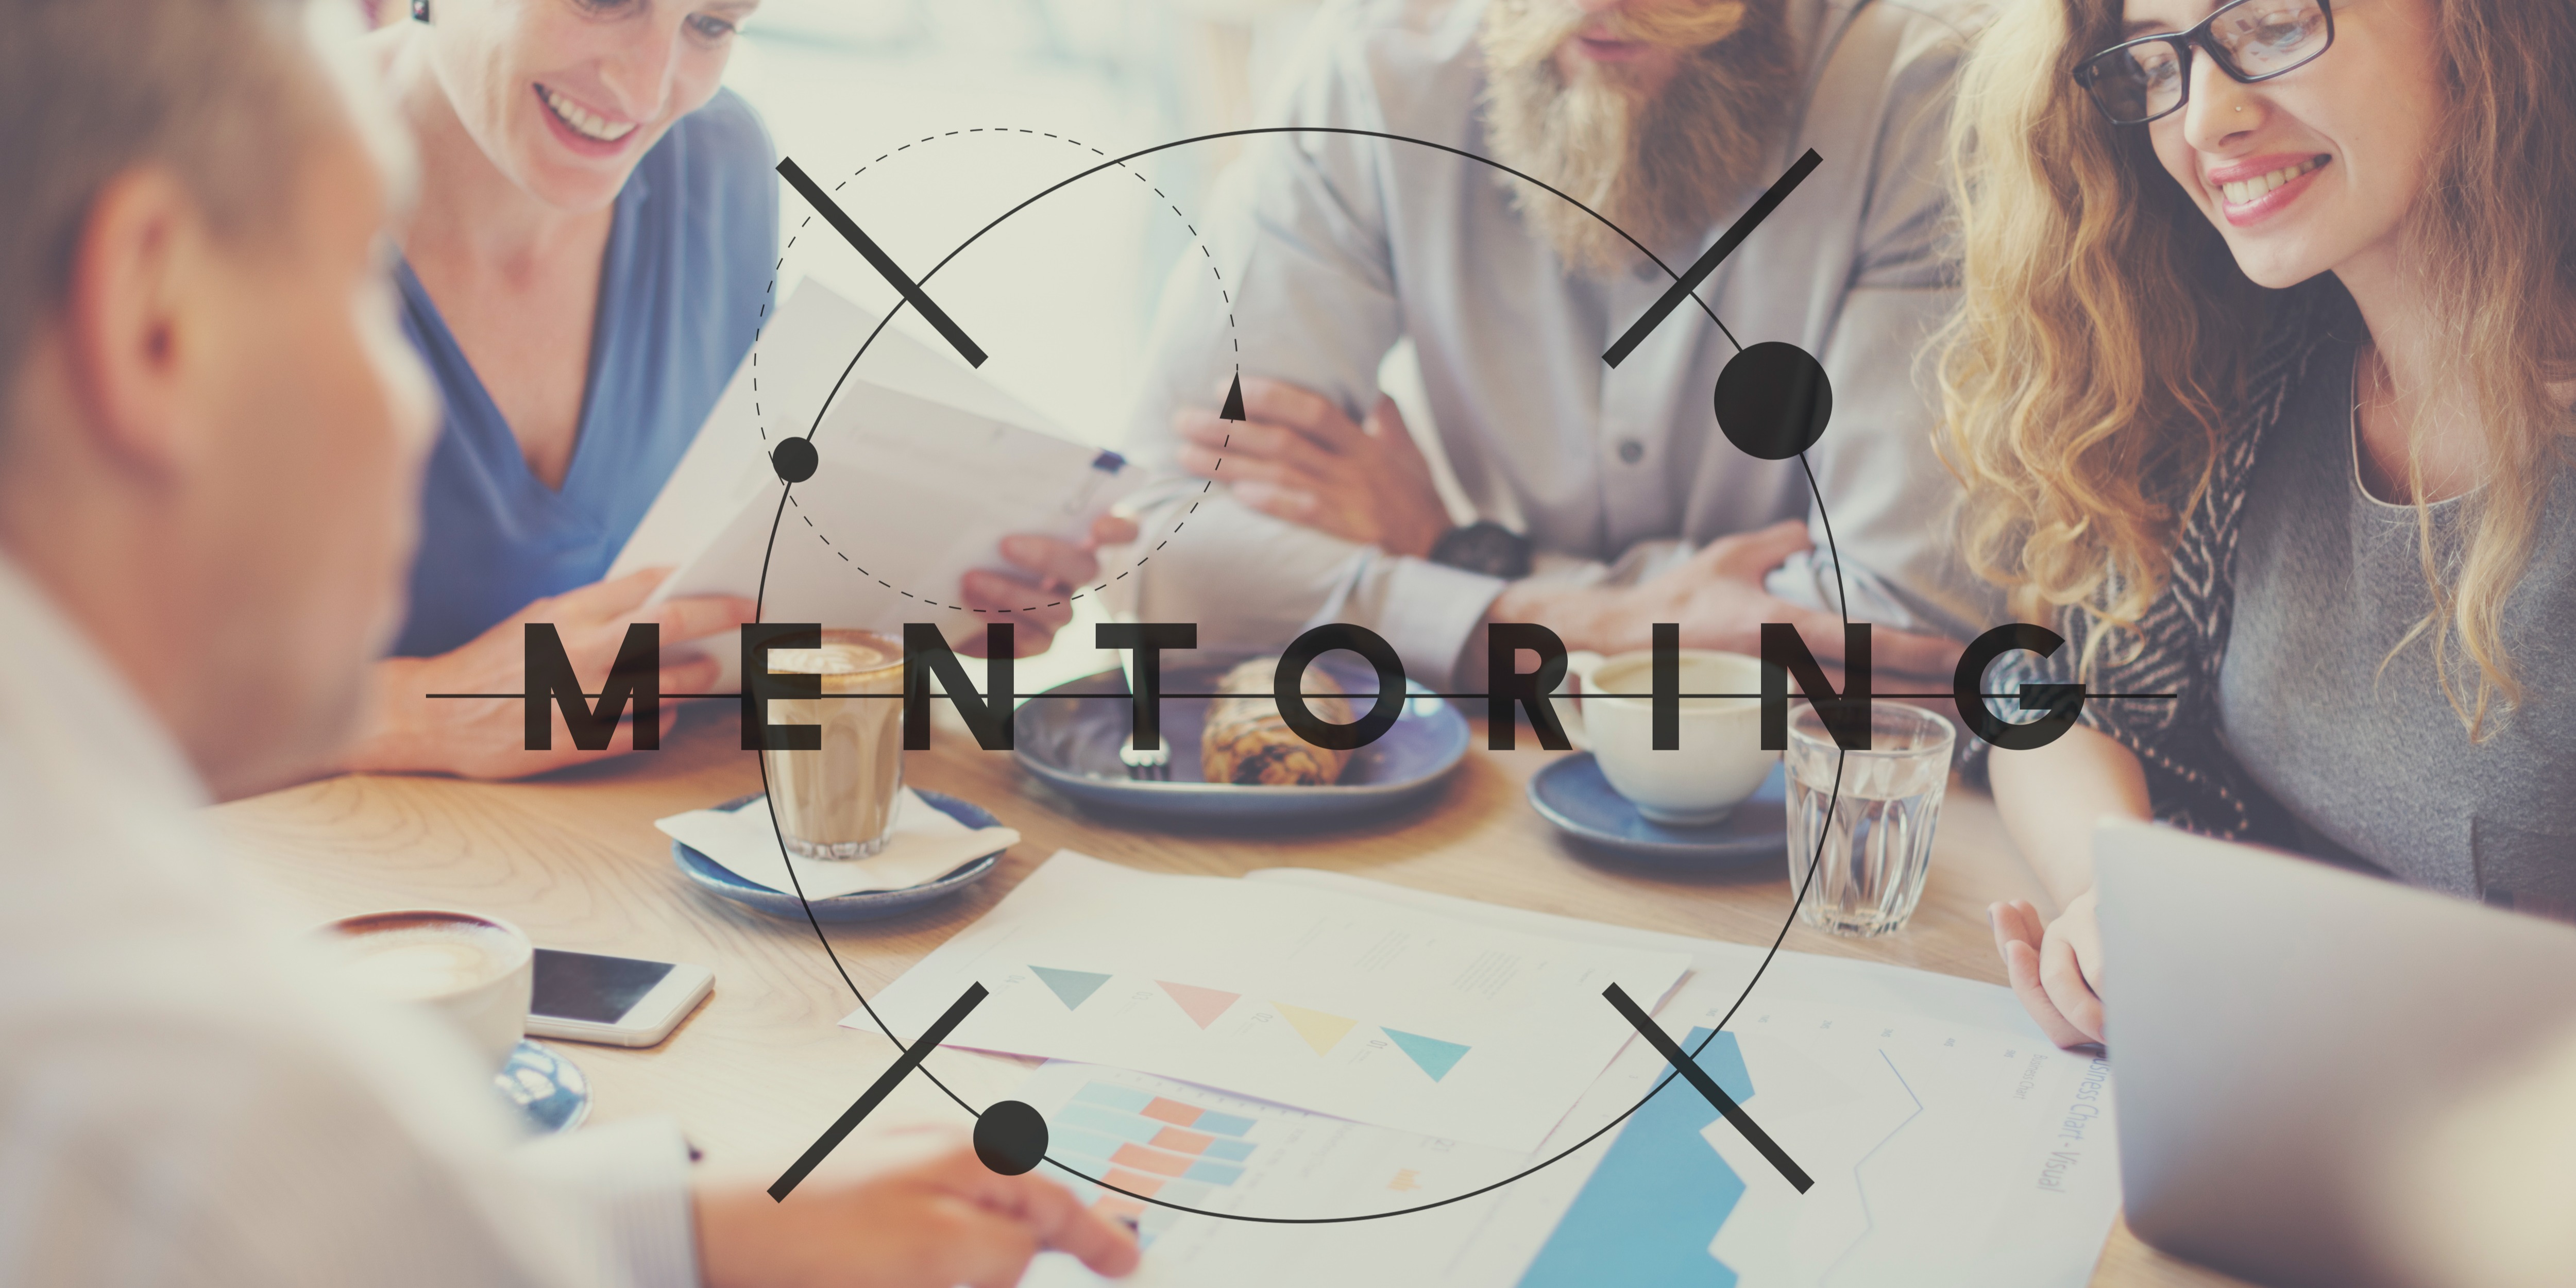 Impact of mentoring in the workplace